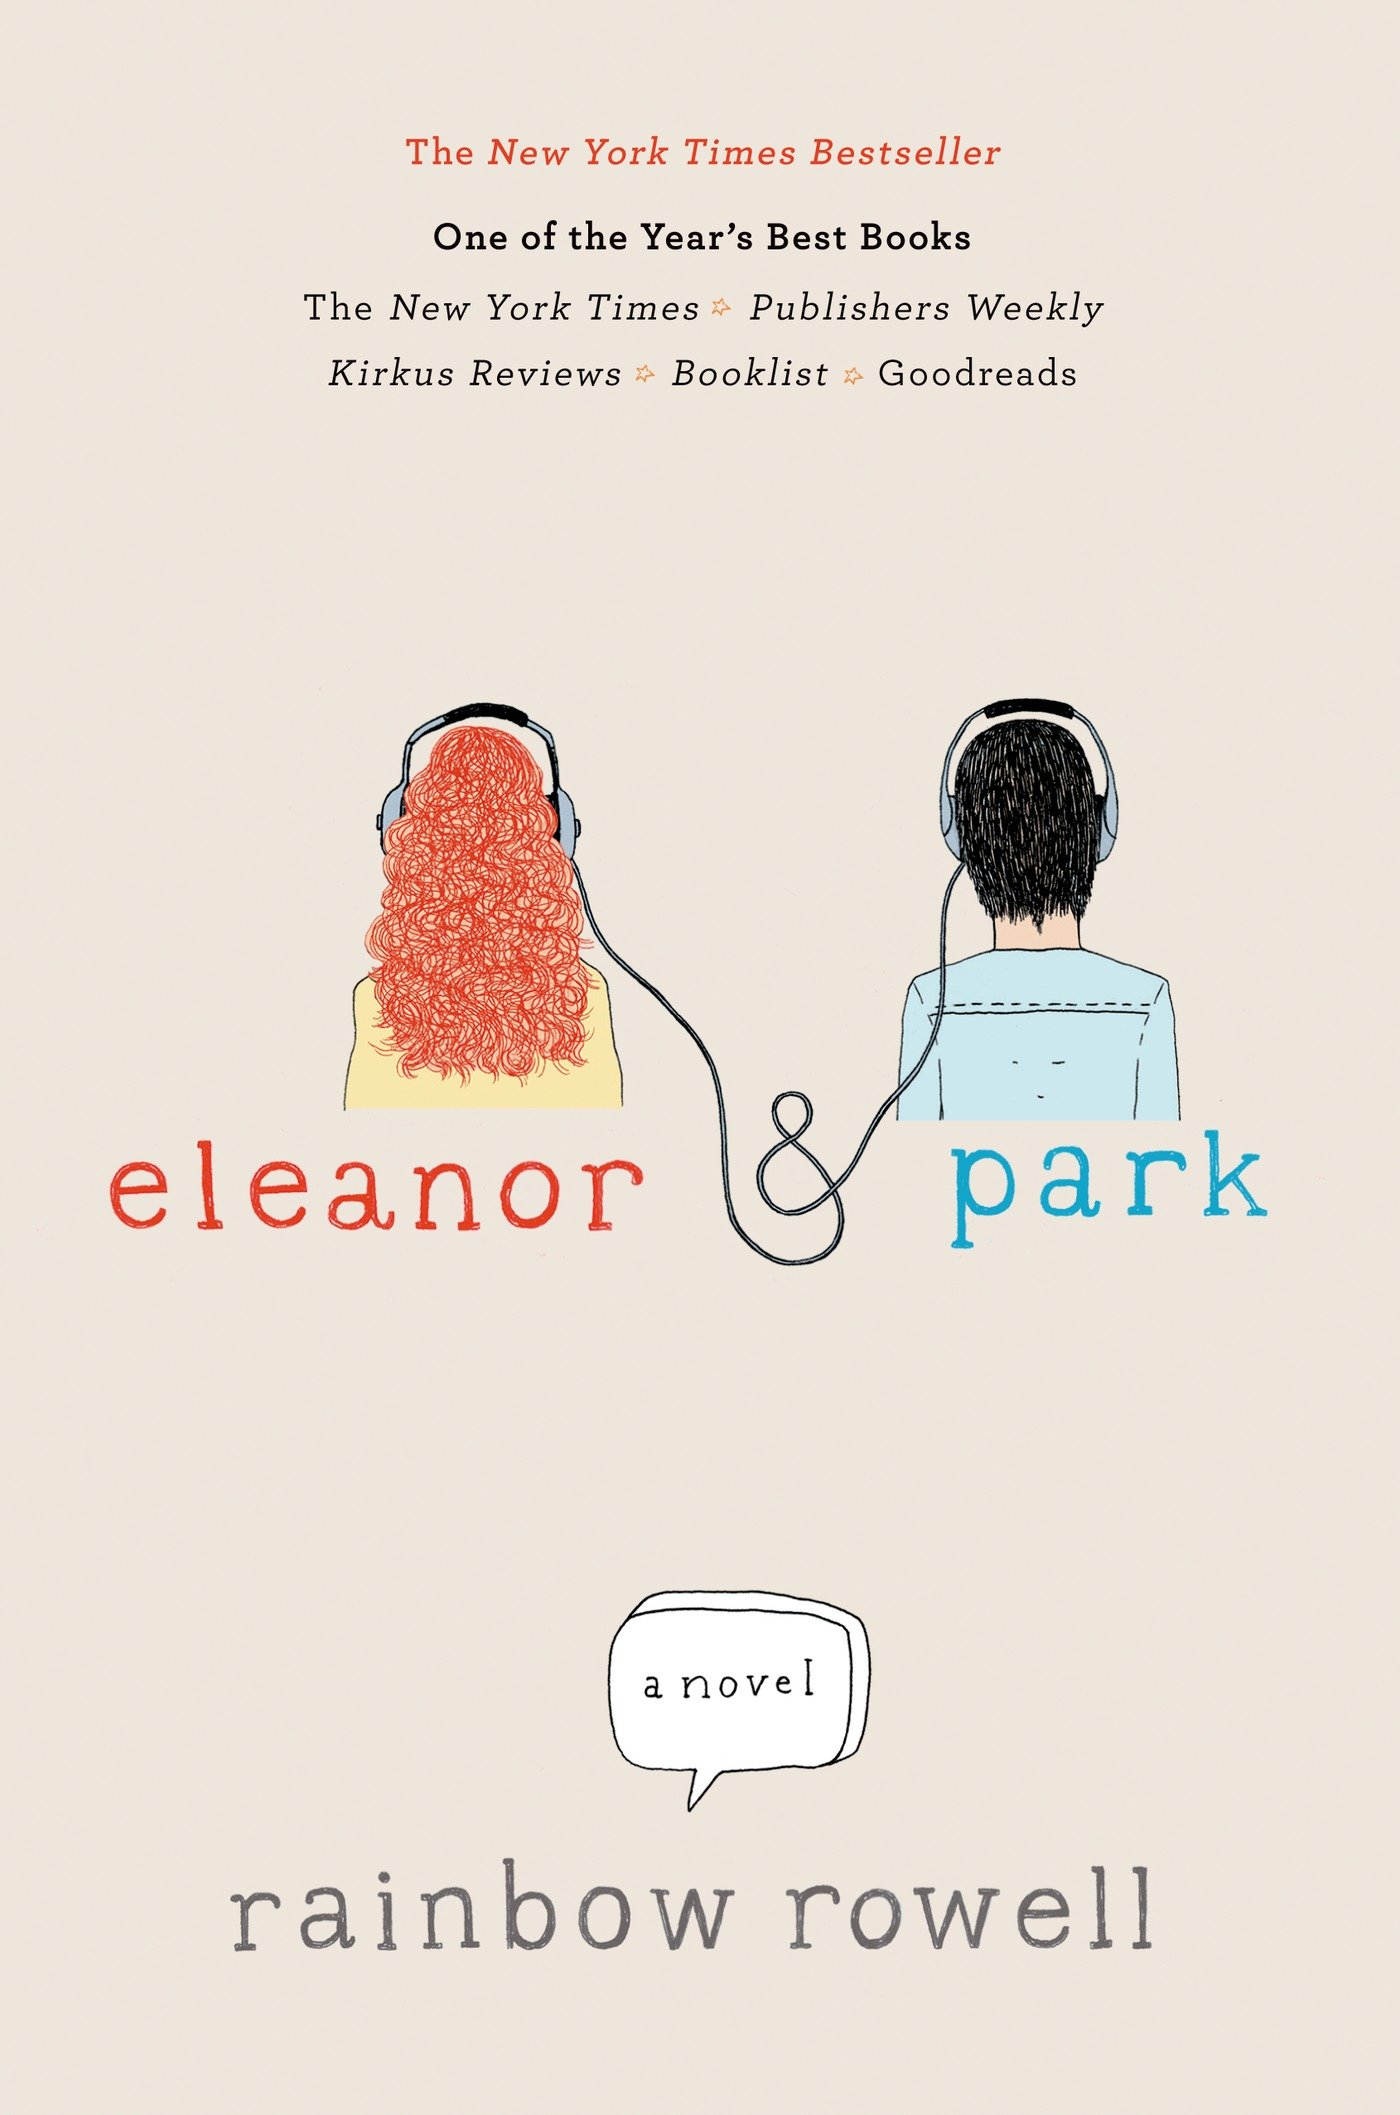 Image for "Eleanor and Park"